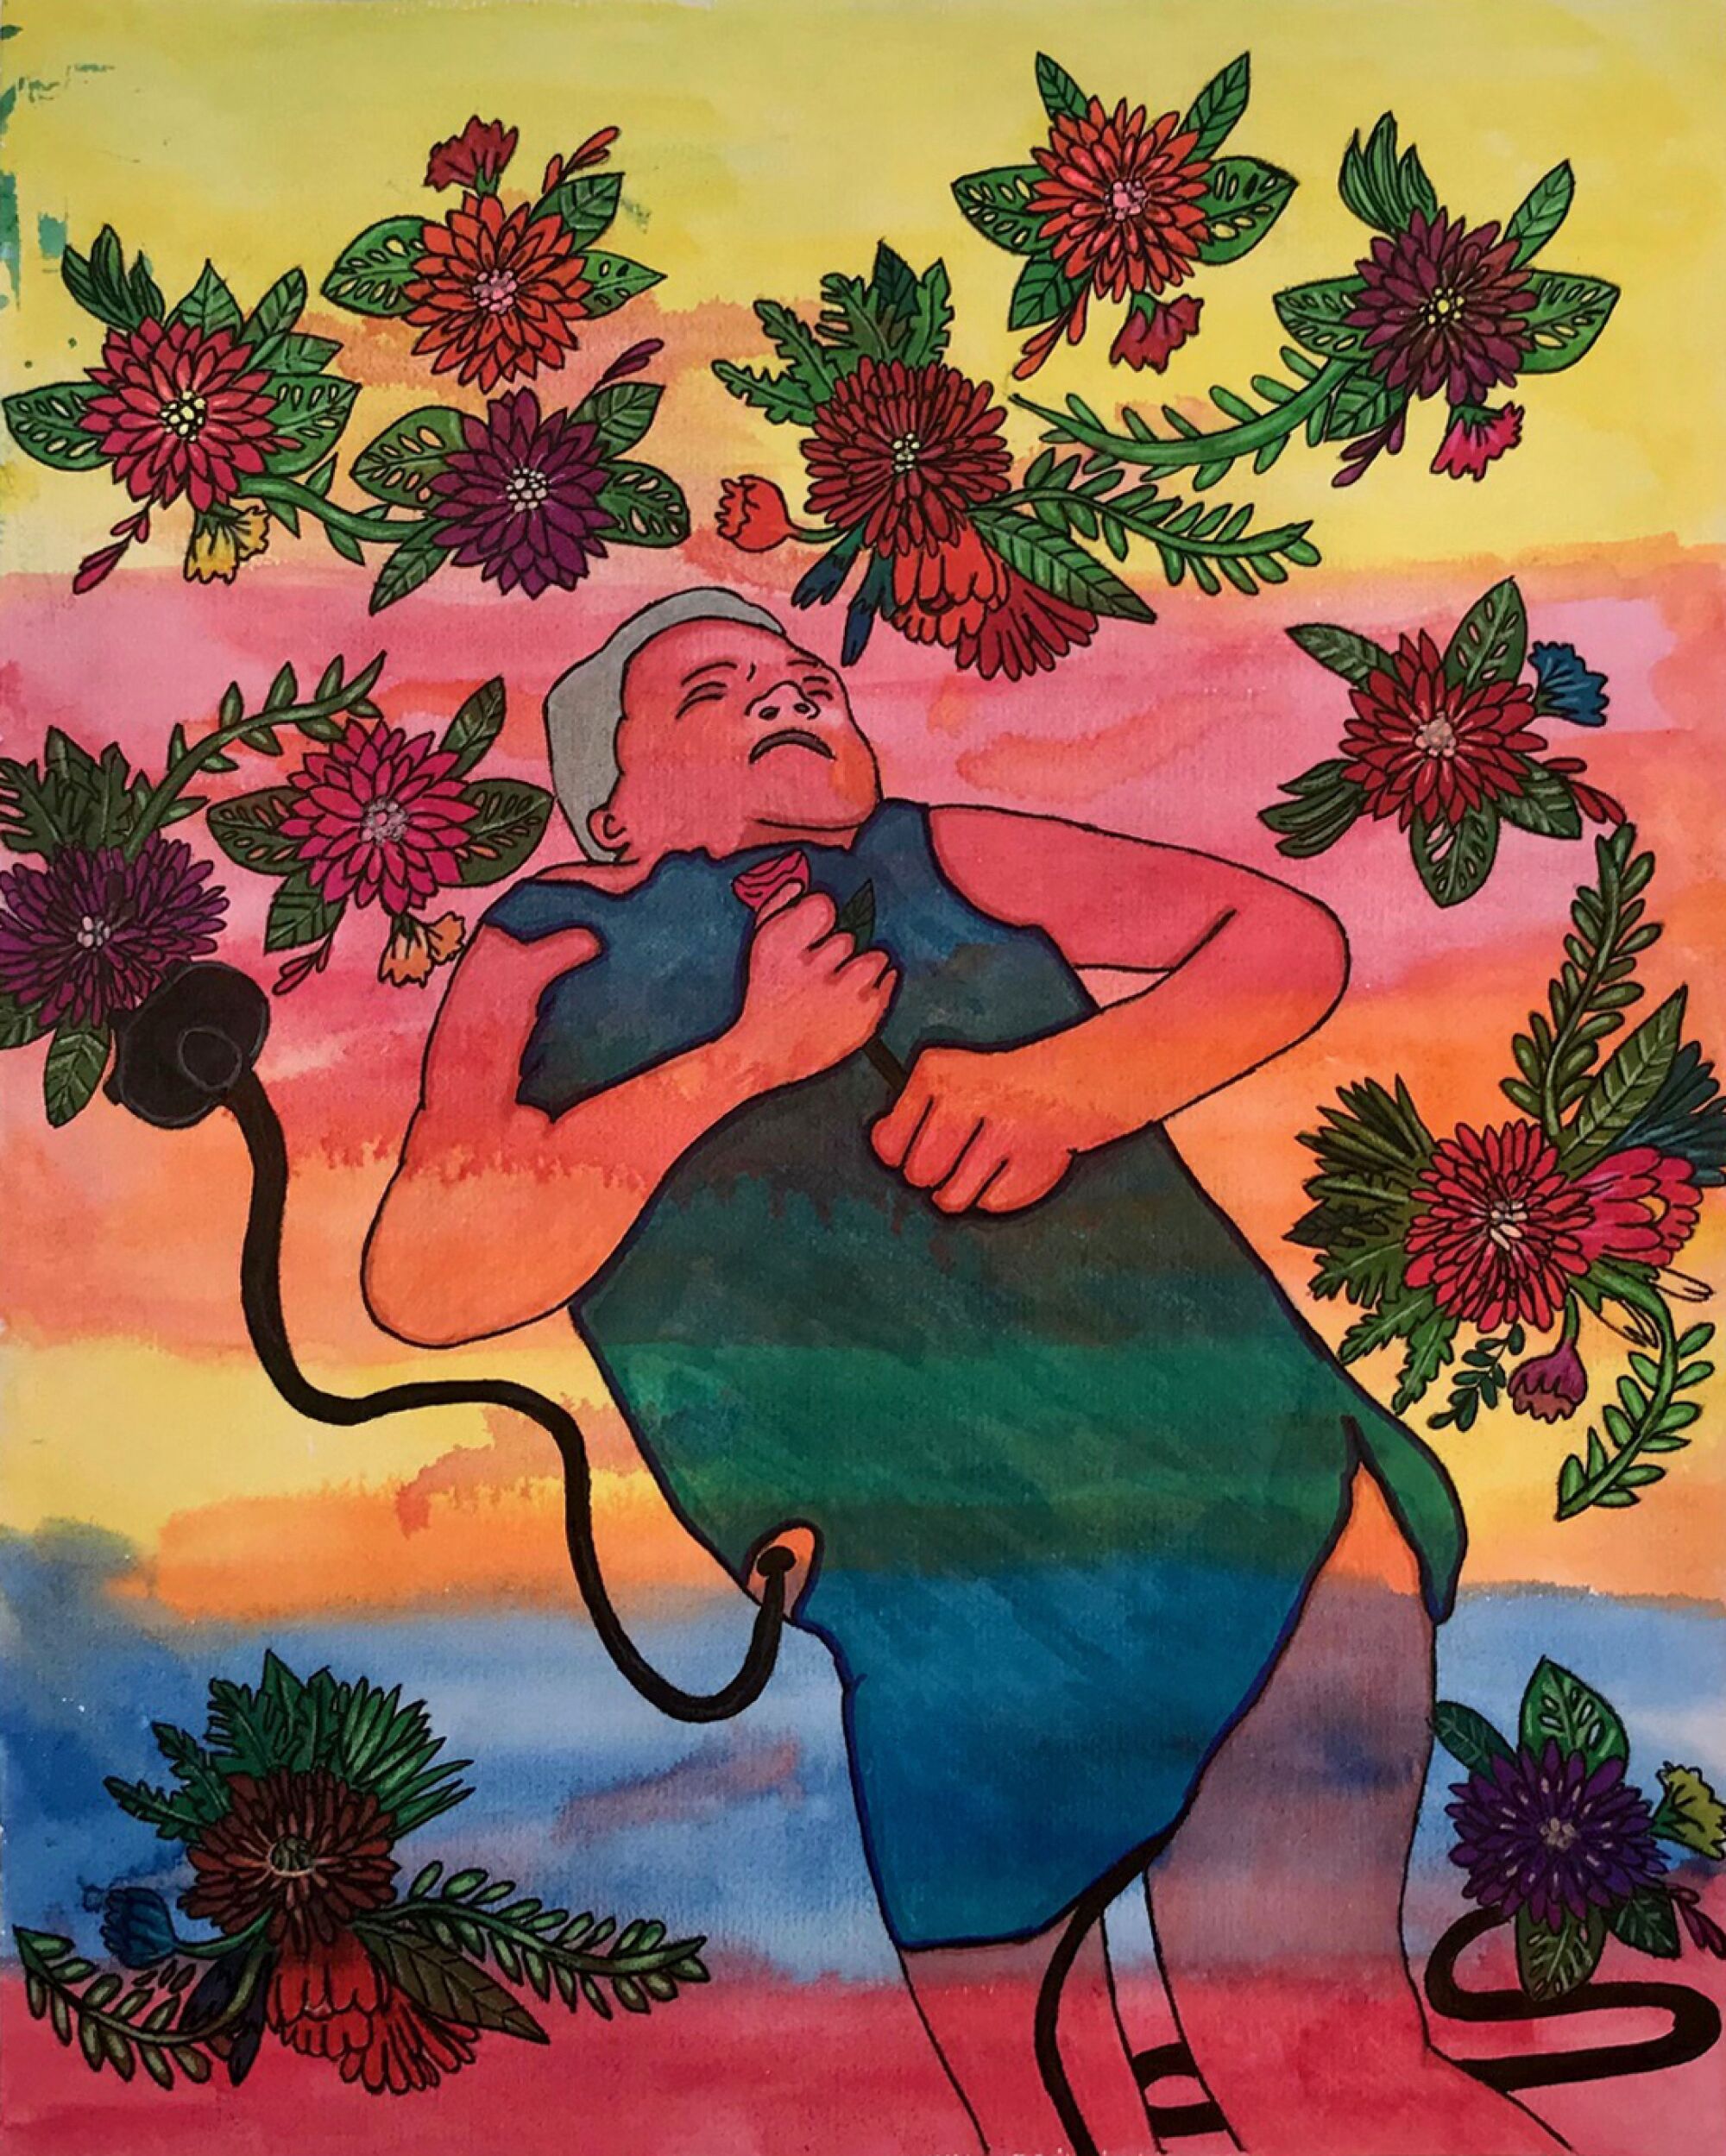 A sleeping woman floats in a rainbow sky, a tube connecting her to the flowers that surround her